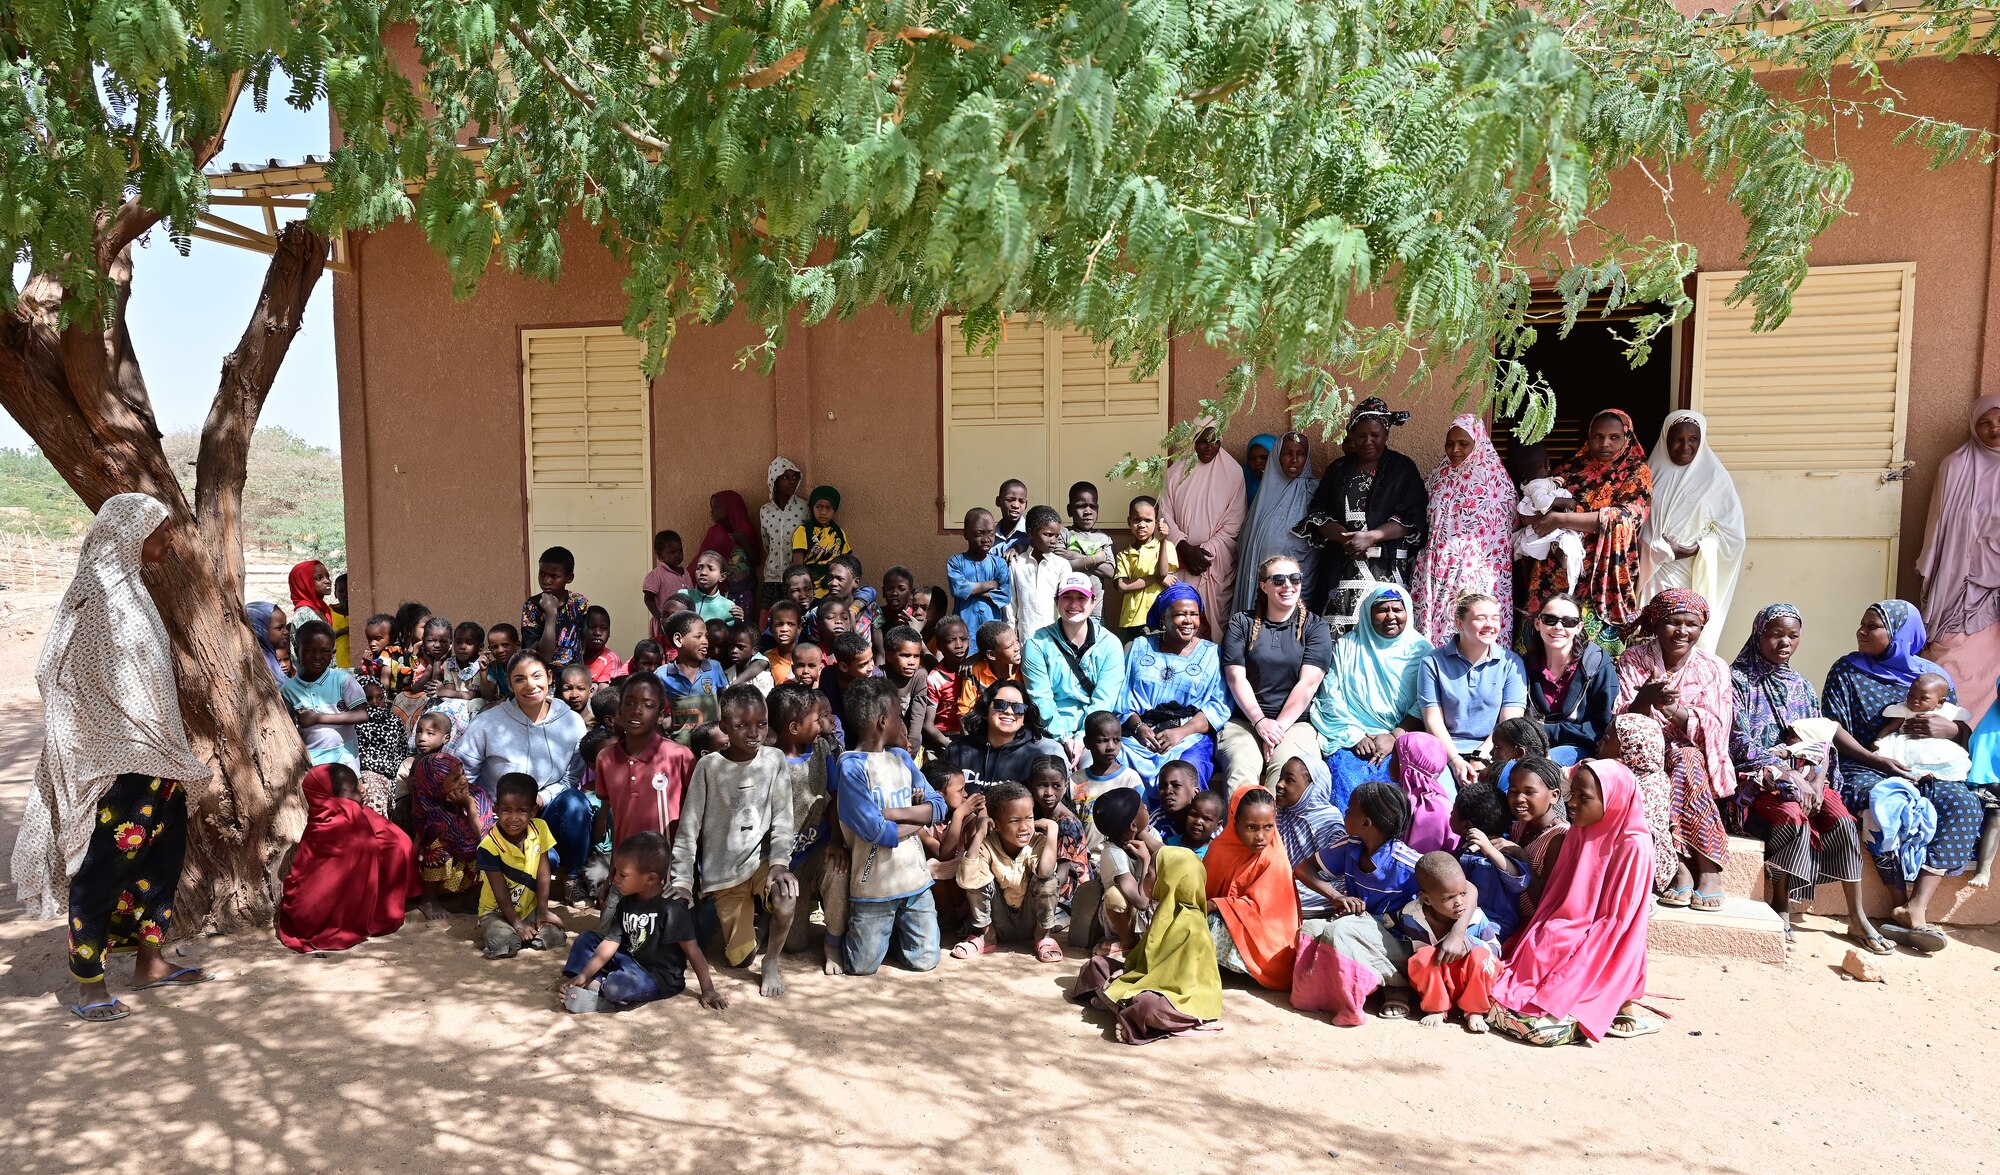 Members from Air Base 201 Women’s Association, Aladab Women’s Association members and children take a group photo in the village of Aladab, Agadez, Niger, Feb 27, 2022. During the visit the 201 Women’s Association engaged with the local community, built relationships, and gained  insight on leadership from a different gender perspective. (U.S. Air Force photo by Tech. Sgt. Stephanie Longoria)